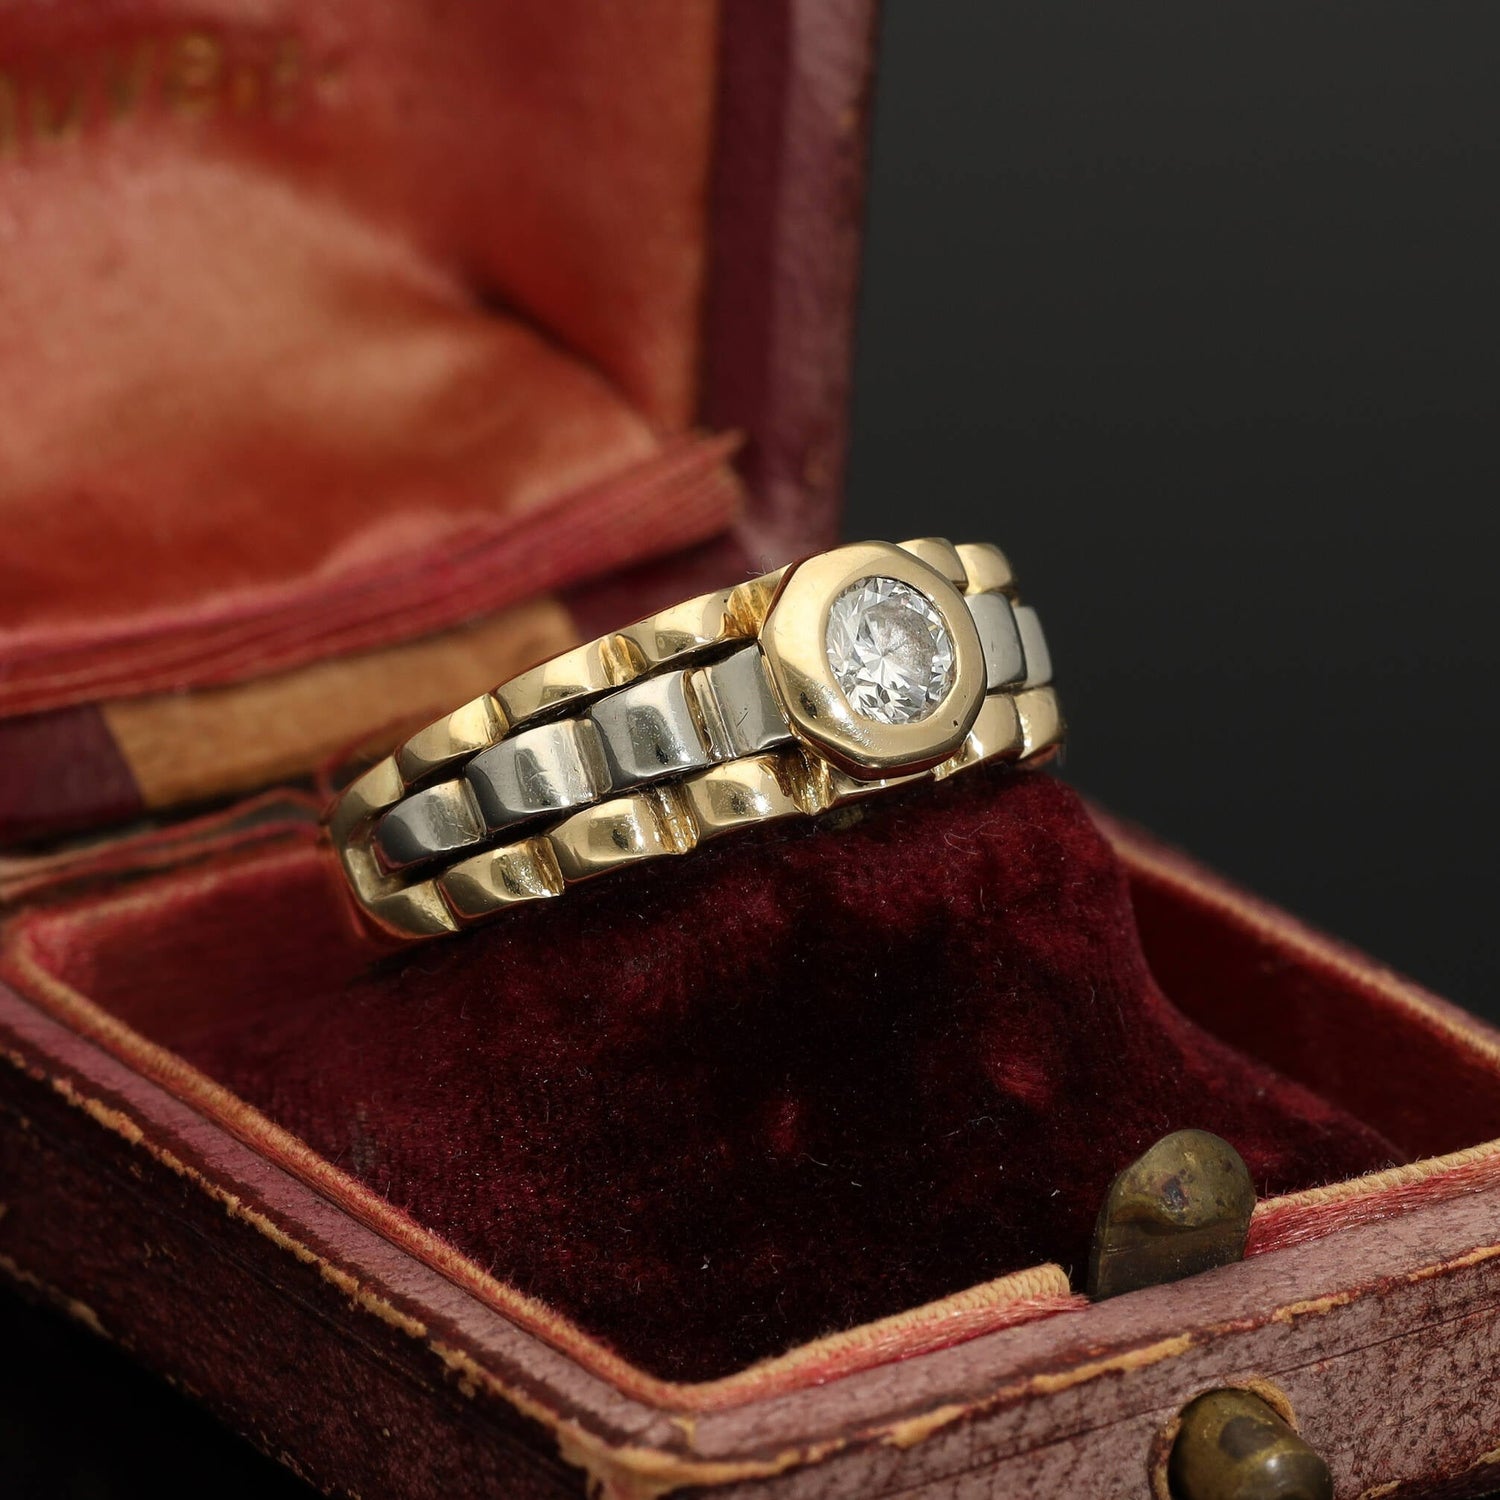 An unbelievably classy Austrian antique diamond solitaire dating back to the year 1925. This posh and heavy ring is crafted in solid 585 (14 karat gold) and has a high-end elegant look!  The band is made in link chain style.